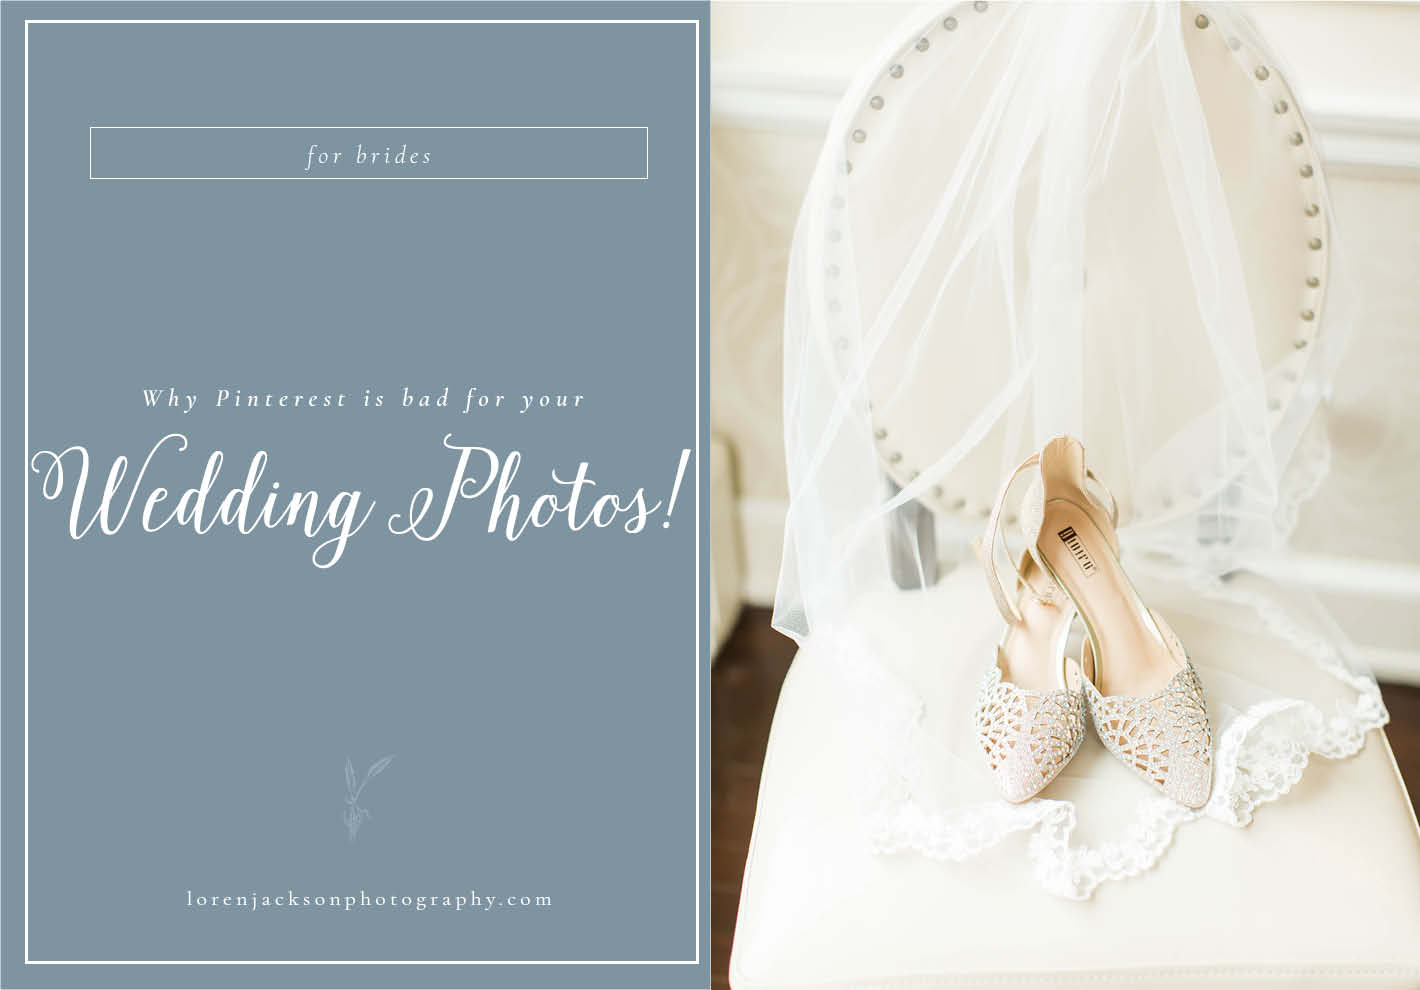 Pinterest is helpful when planning your wedding, but has the potential to ruin your wedding photography. Here are four reason why Pinterest is bad for your wedding photos!